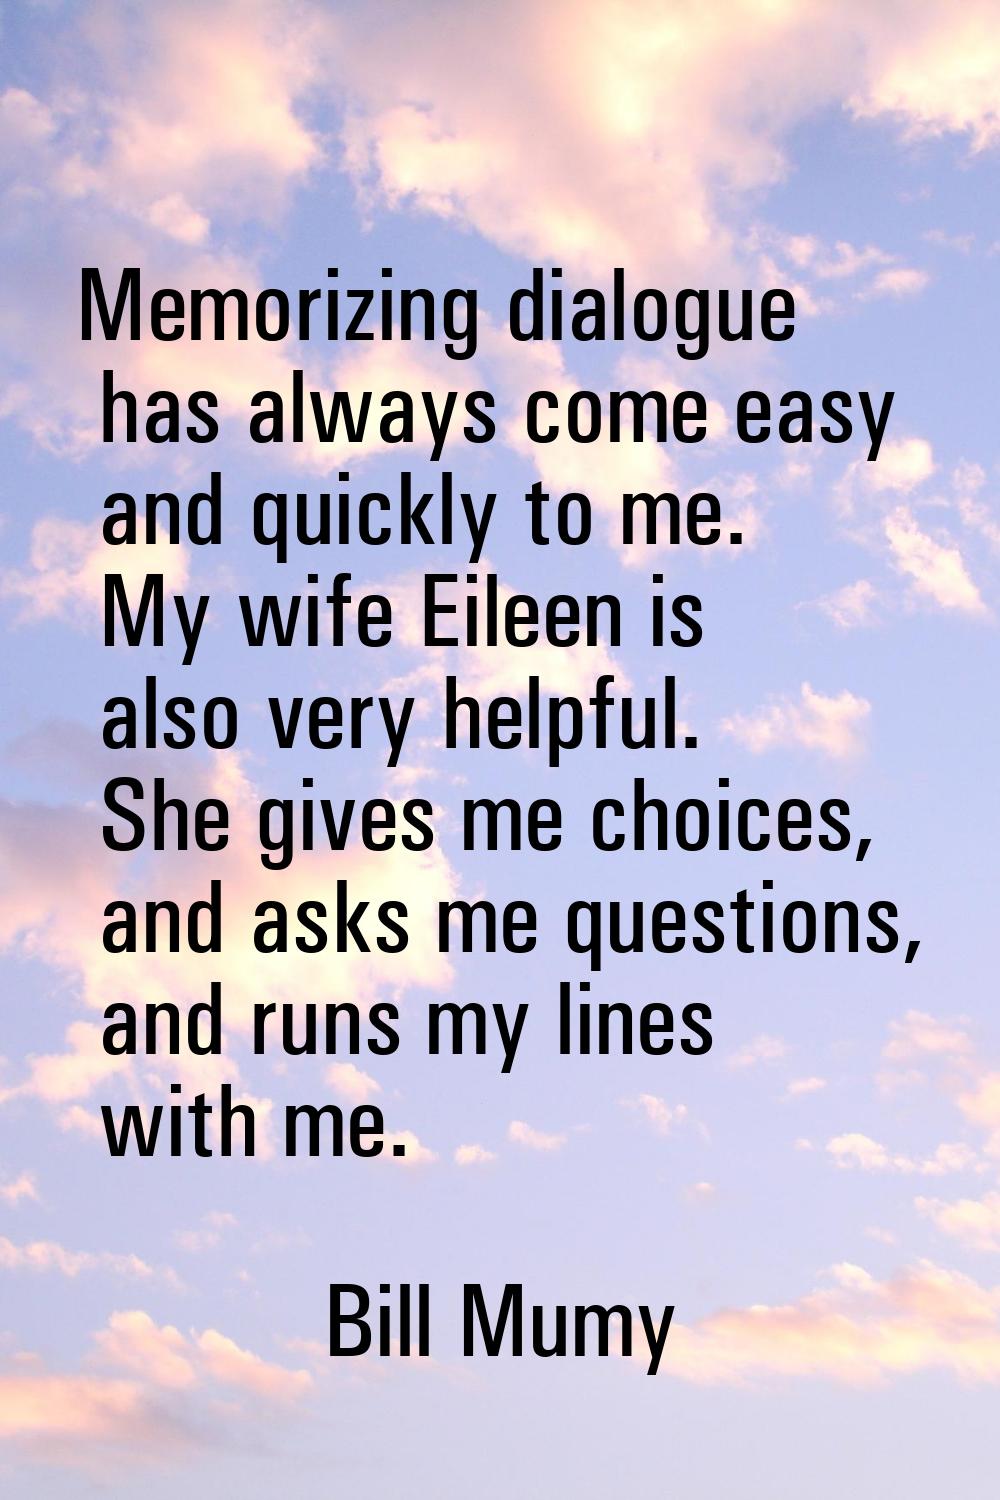 Memorizing dialogue has always come easy and quickly to me. My wife Eileen is also very helpful. Sh